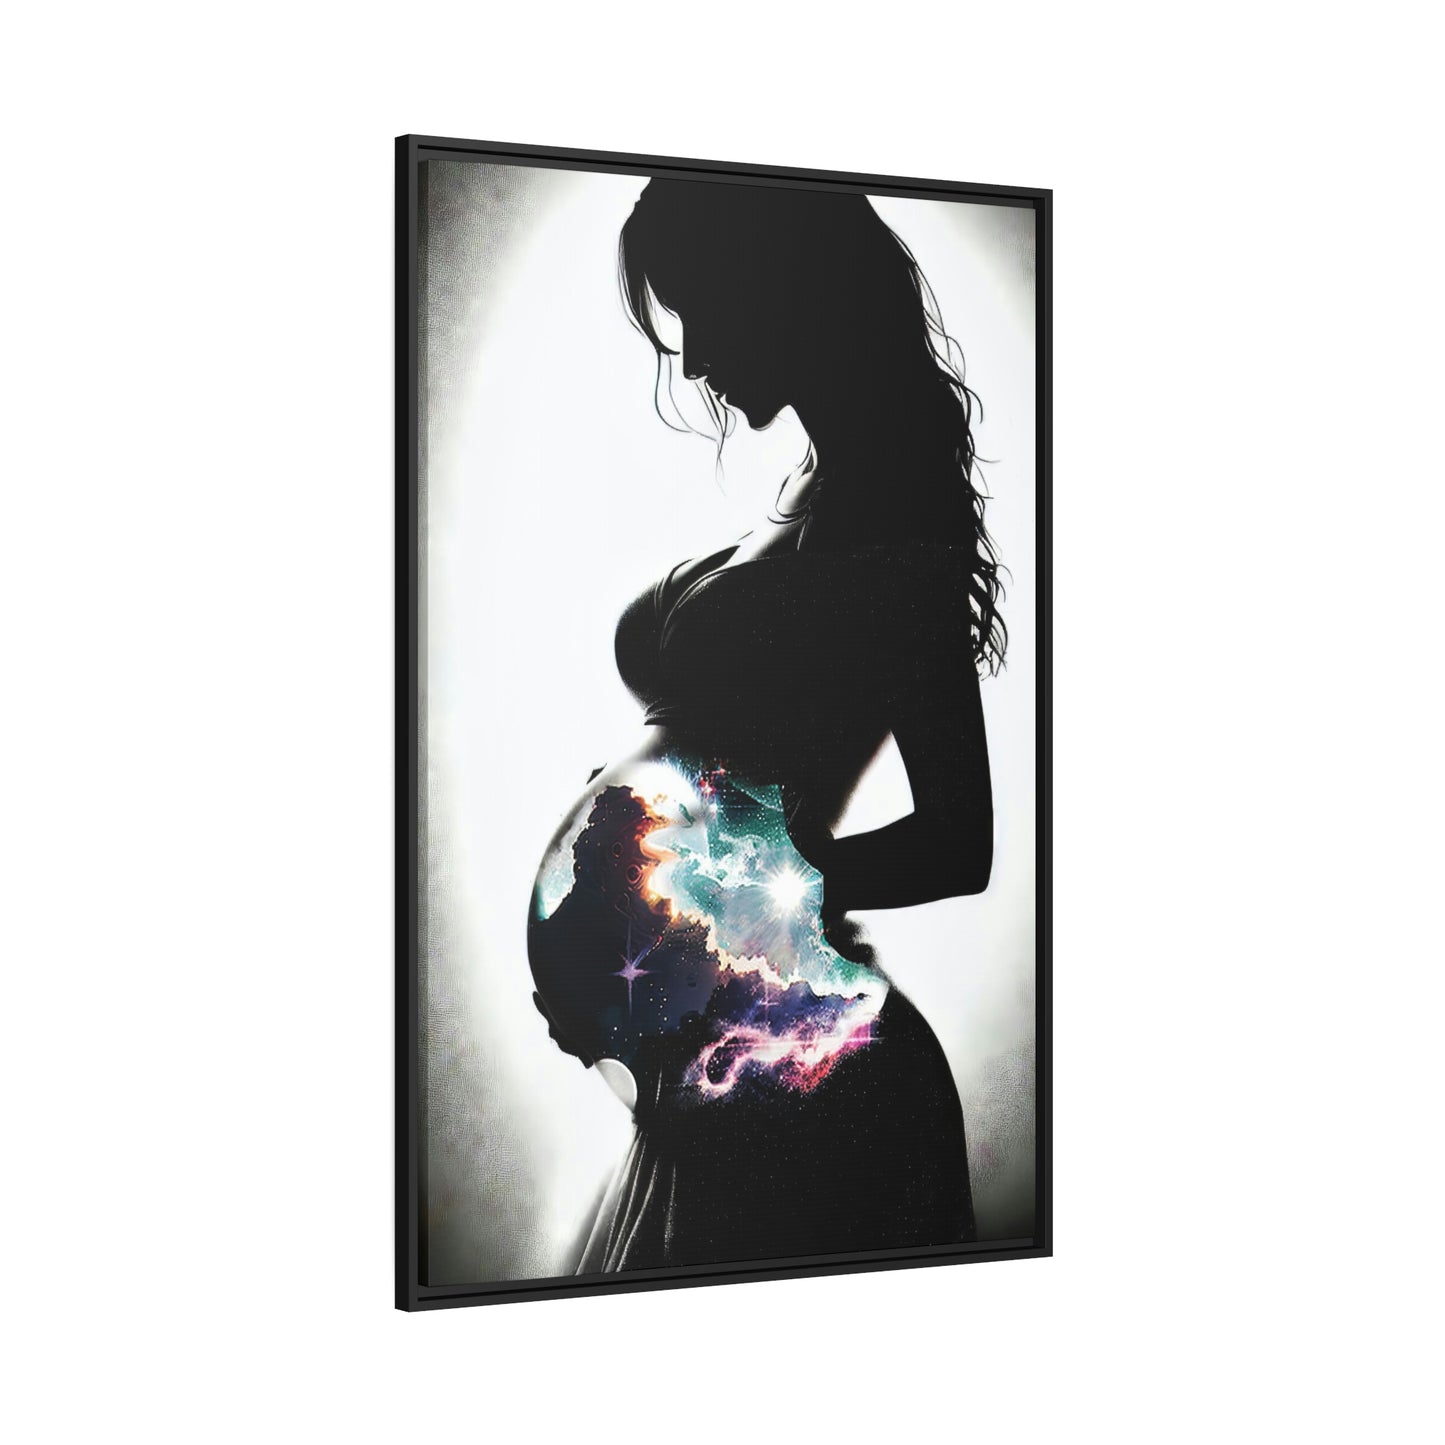 Birth Of The Universe - Gallery Grade Canvas In Floater Frame